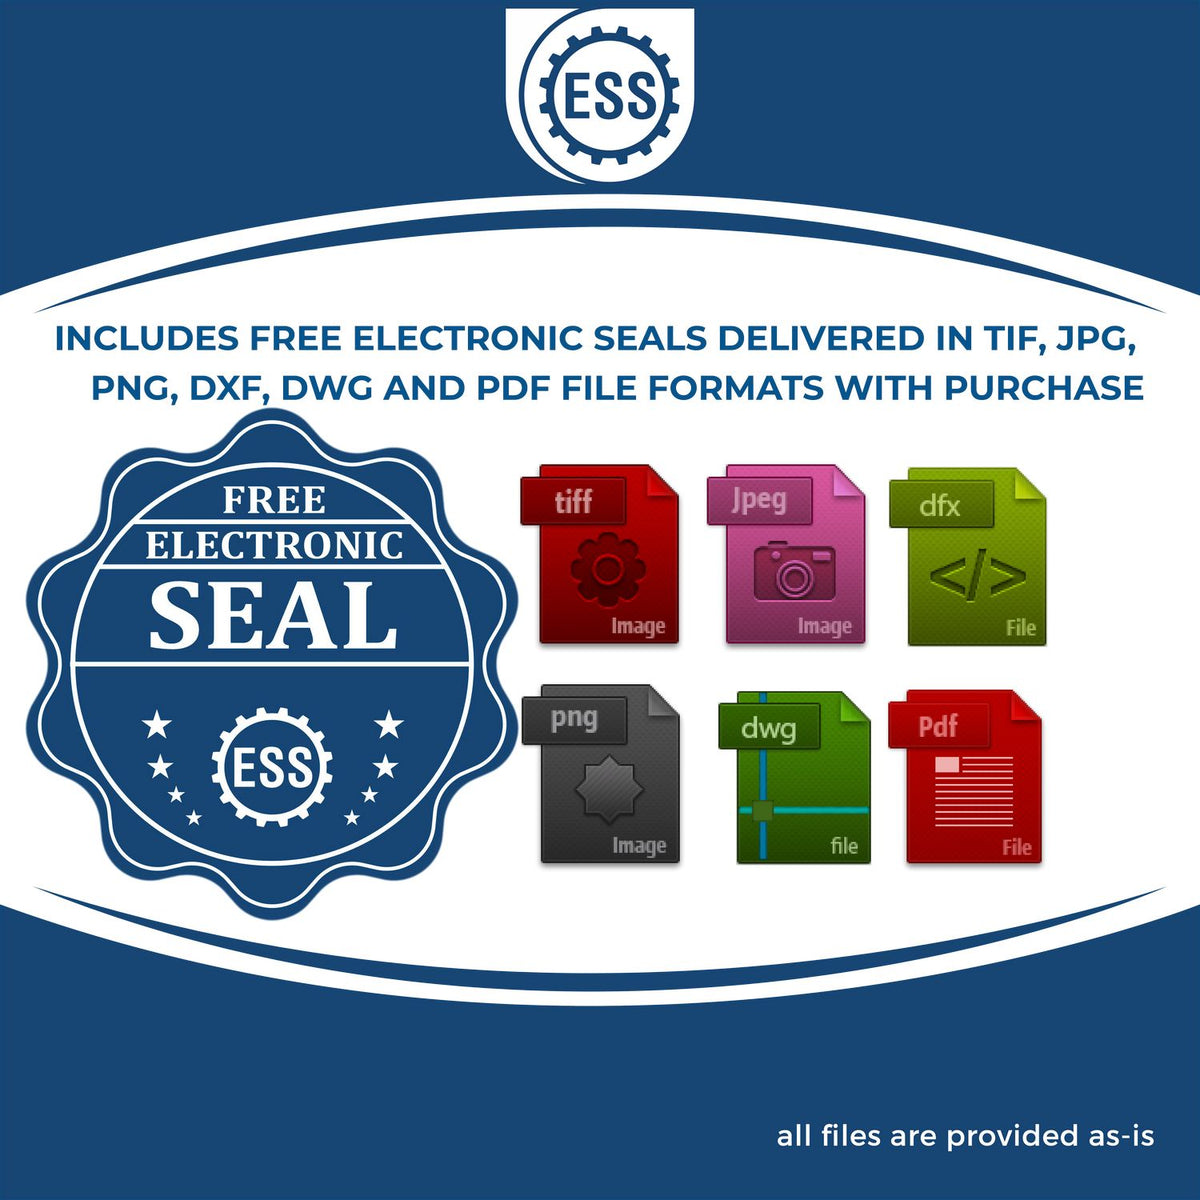 An infographic for the free electronic seal for the Long Reach Texas Geology Seal illustrating the different file type icons such as DXF, DWG, TIF, JPG and PNG.